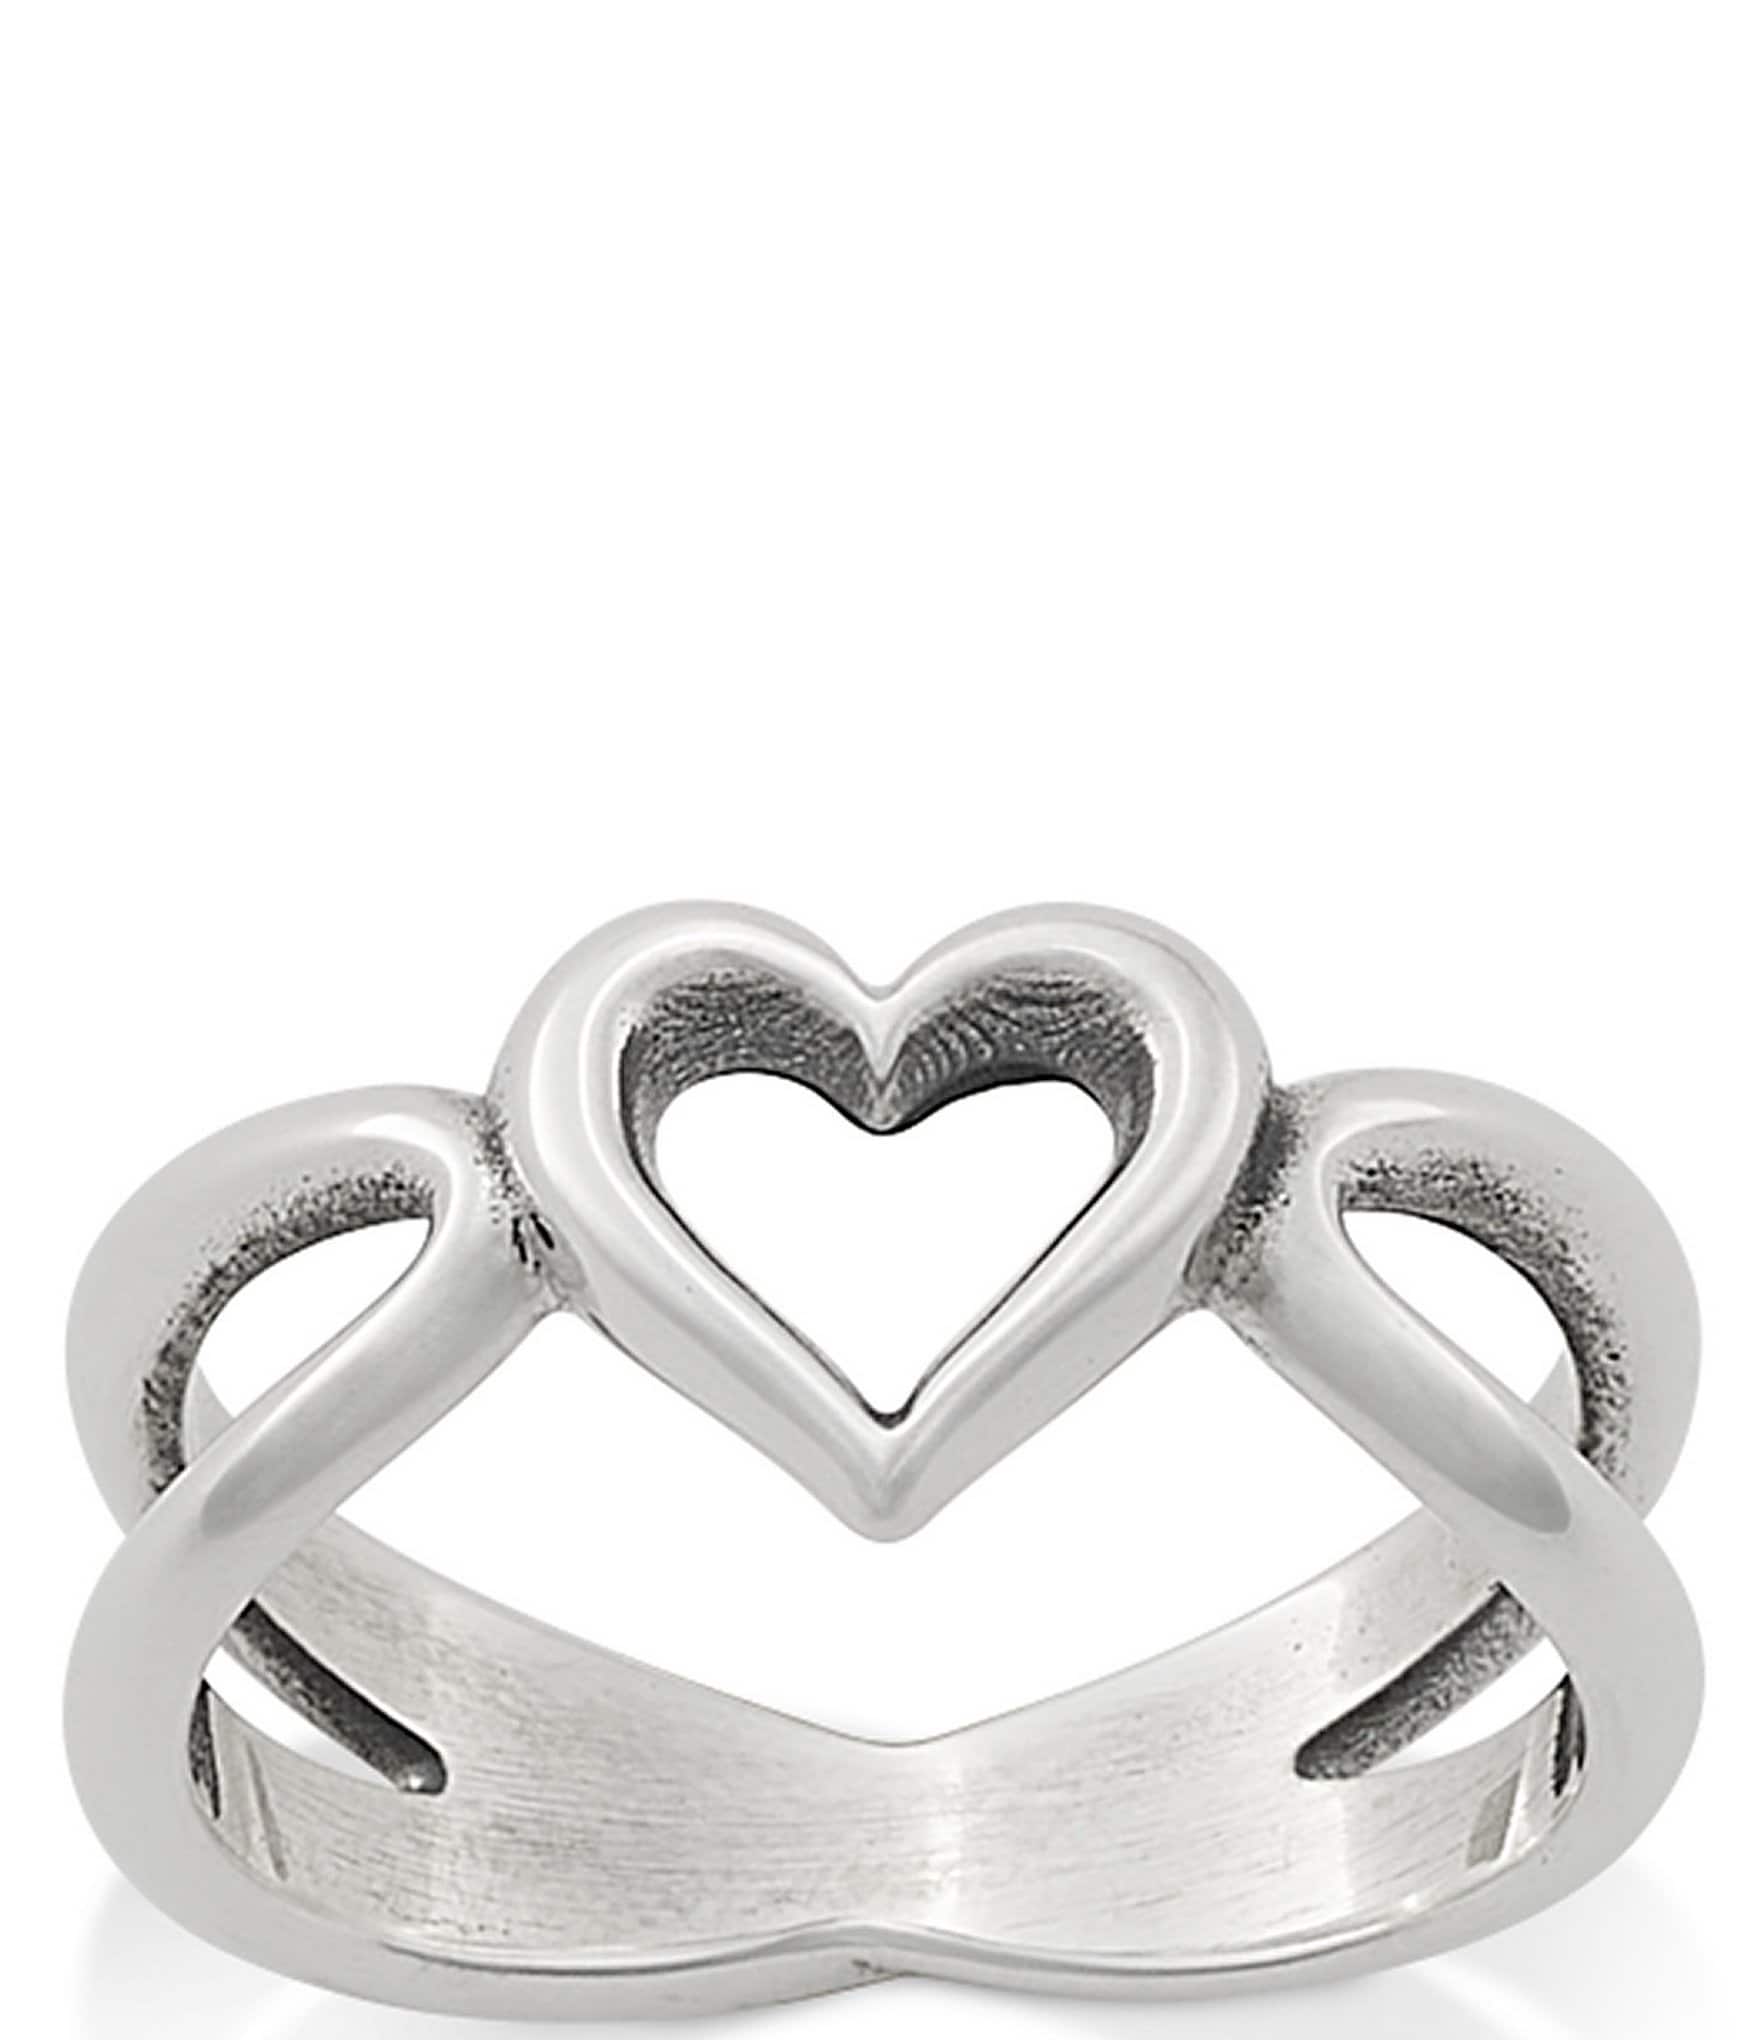 Buy Queen of My Heart Charm for USD 58.00 | James Avery | Heart charm,  Sterling silver heart, Silver charms